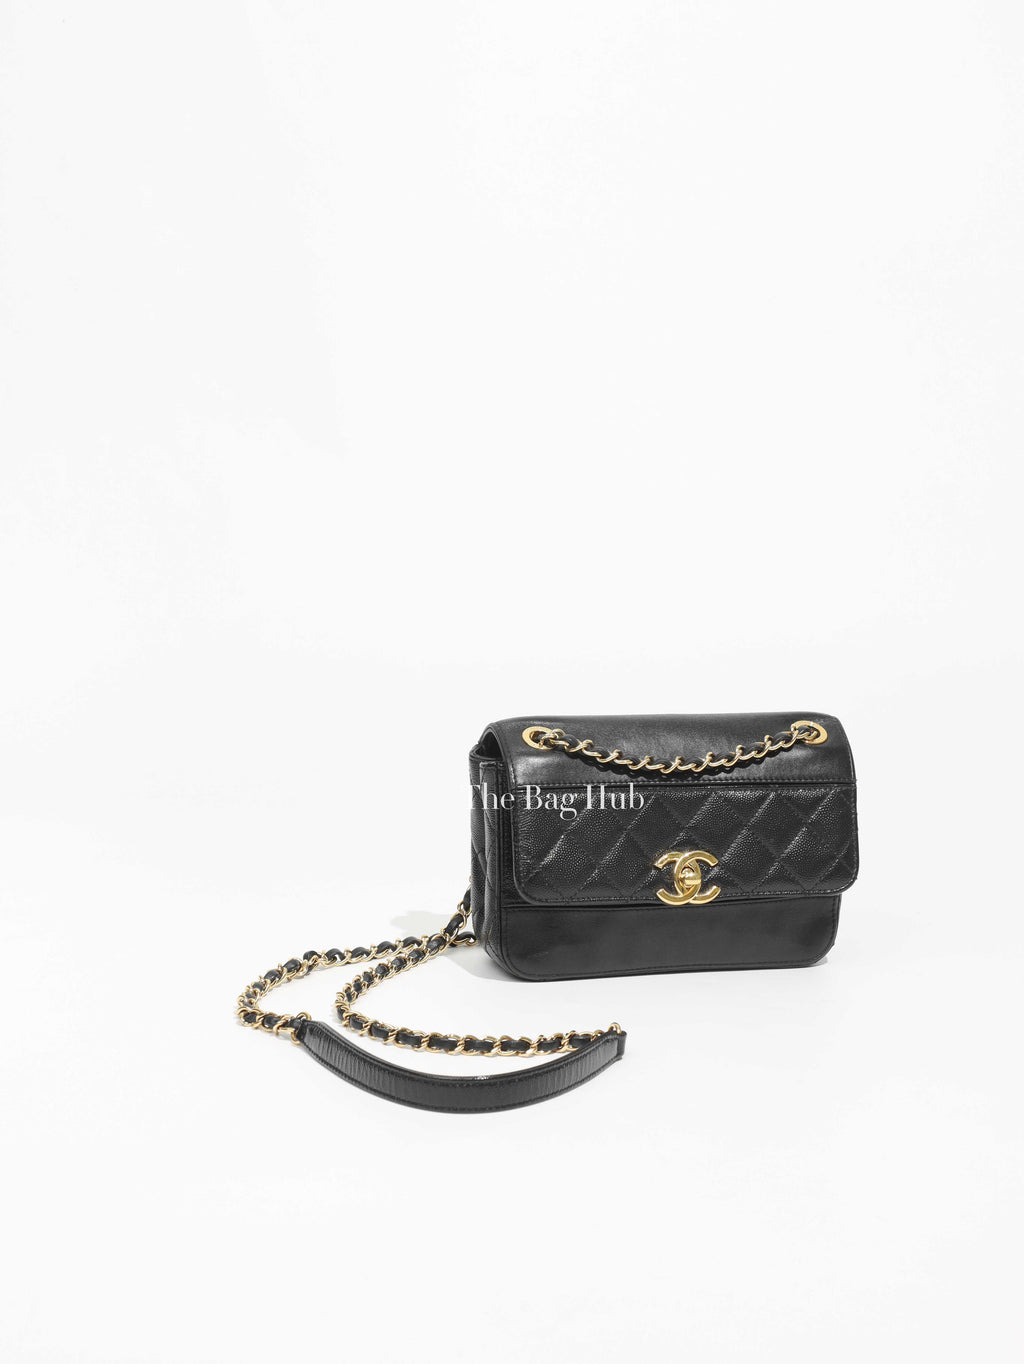 Chanel Black Leather Quilted CC Mini Rectangular Flap Bag